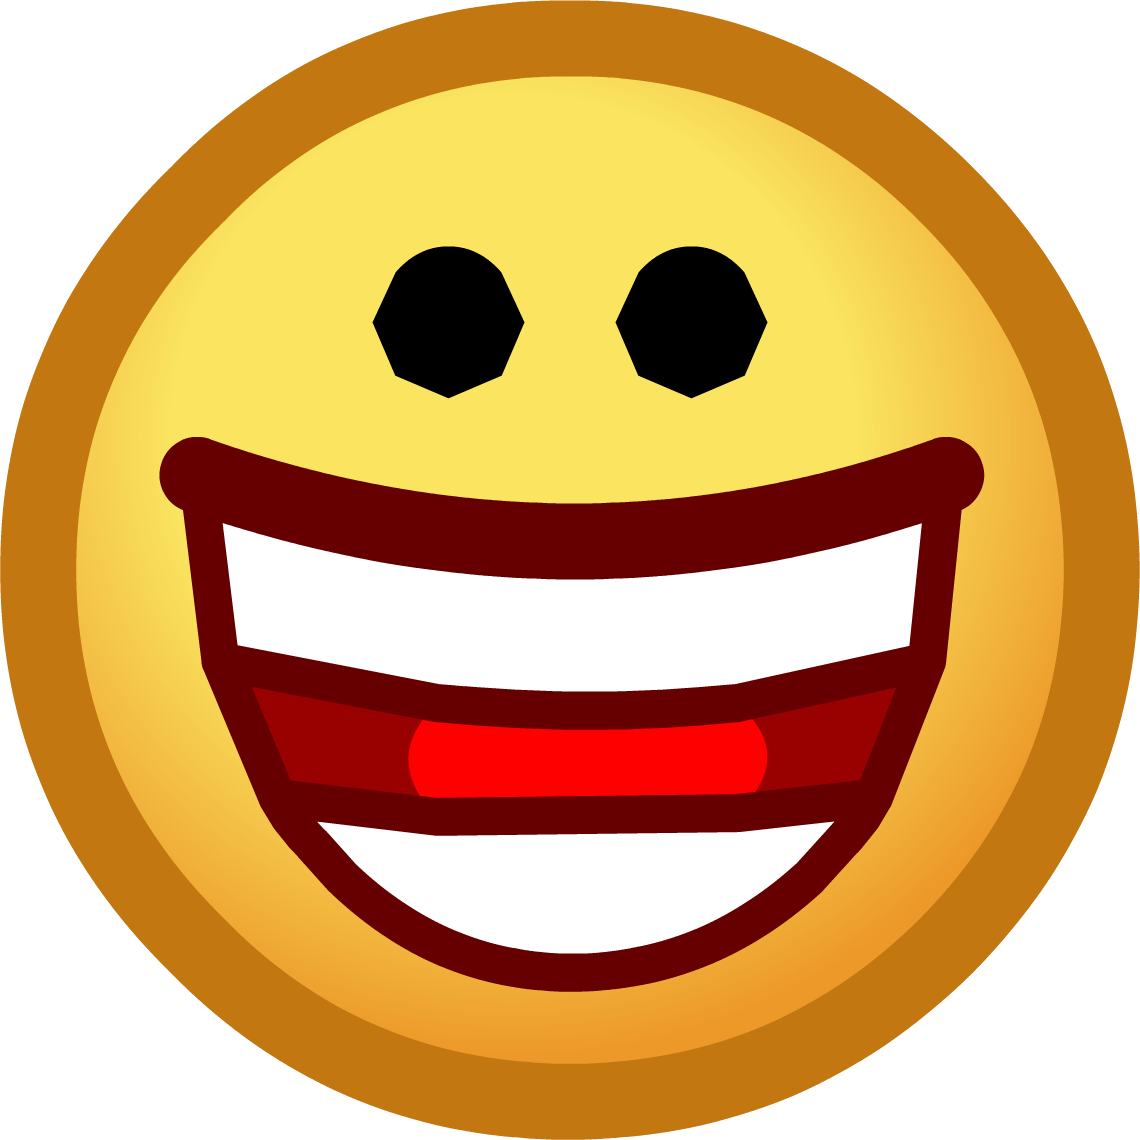 Laughing Emoticons Free - ClipArt Best